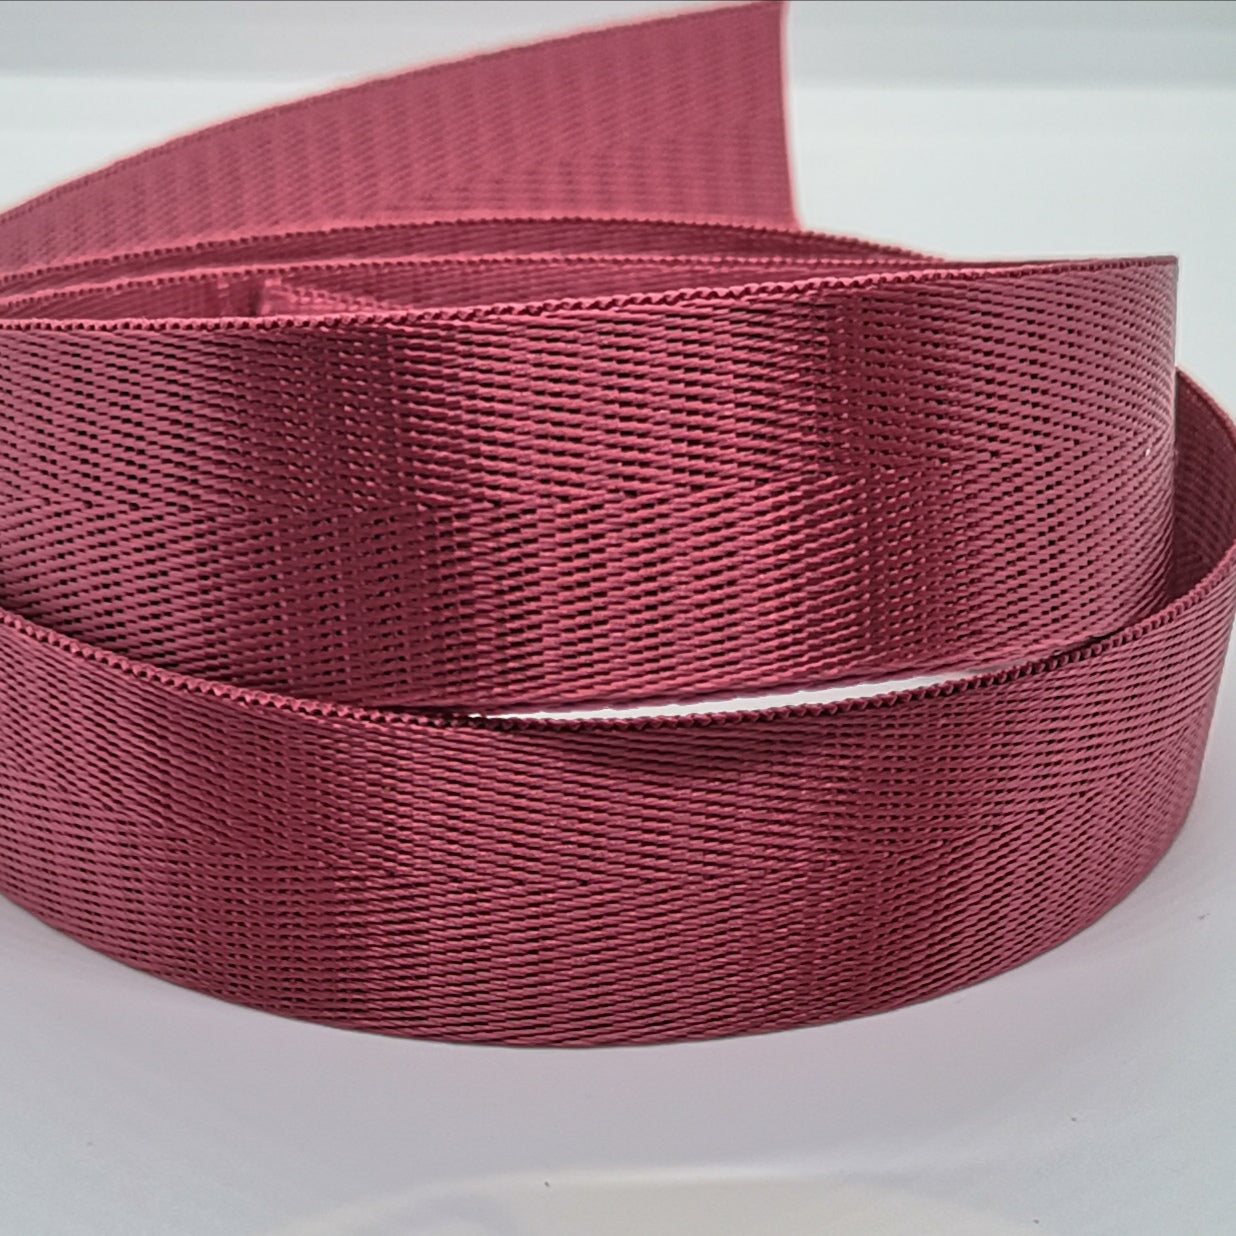 1" Wide Webbing - Solid Color - RASPBERRY PINK